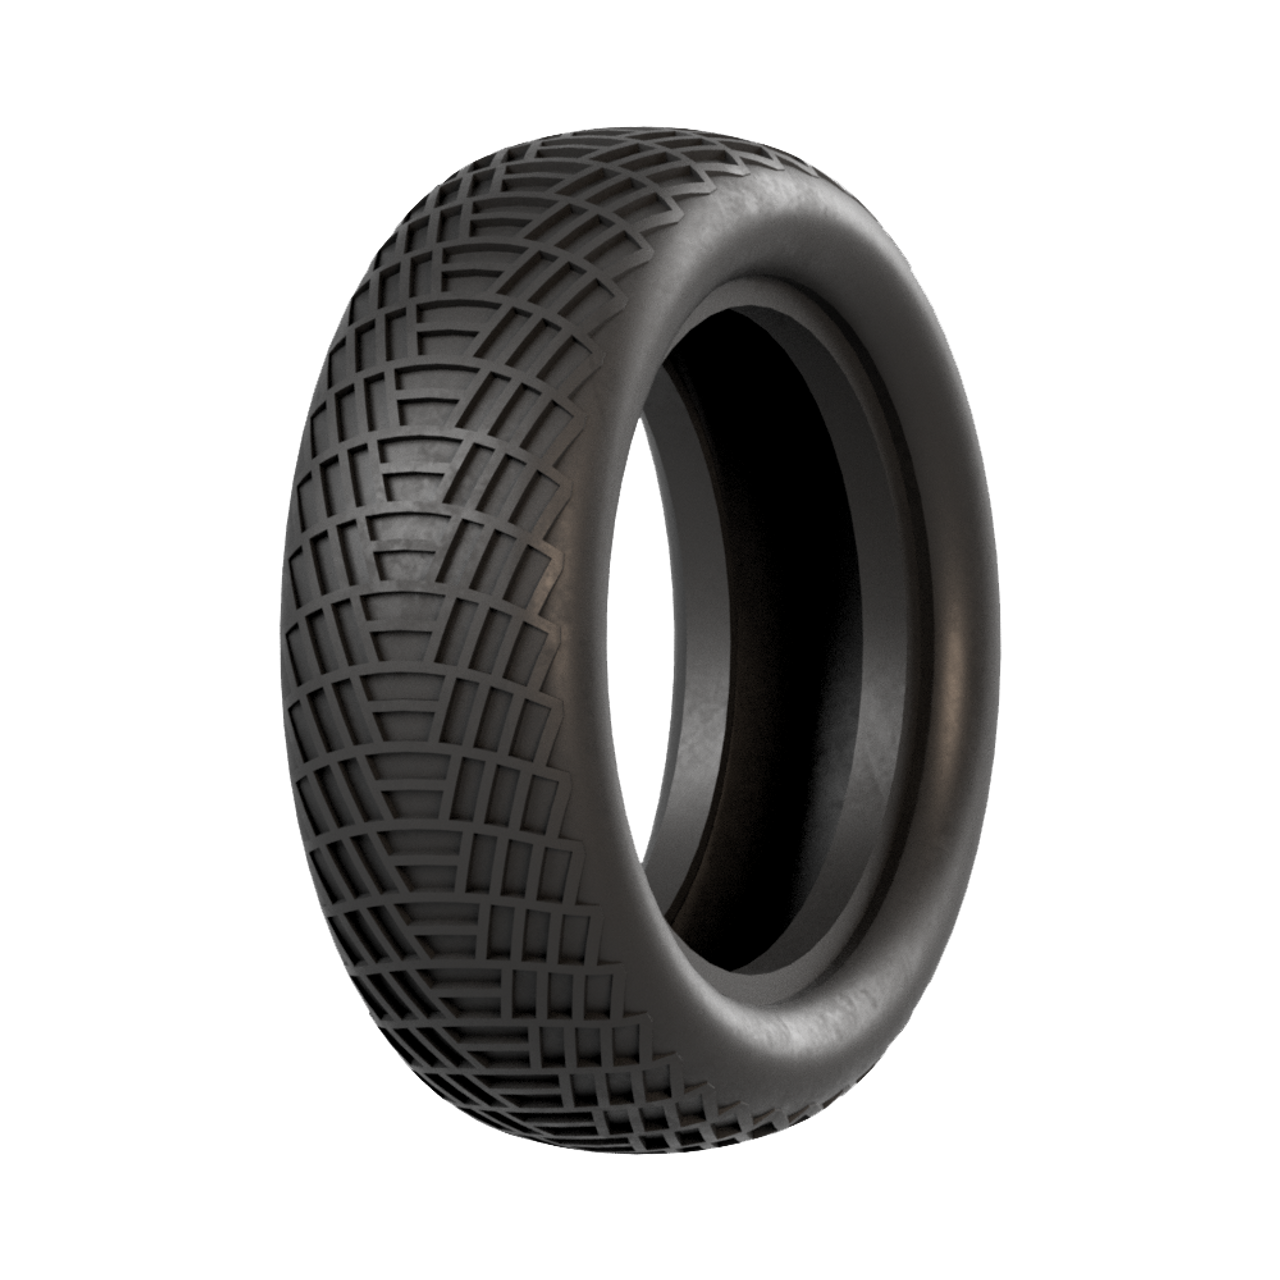 100103CB RAW SPEED BUGGY FRONT CLAY COMPOUND TIRE